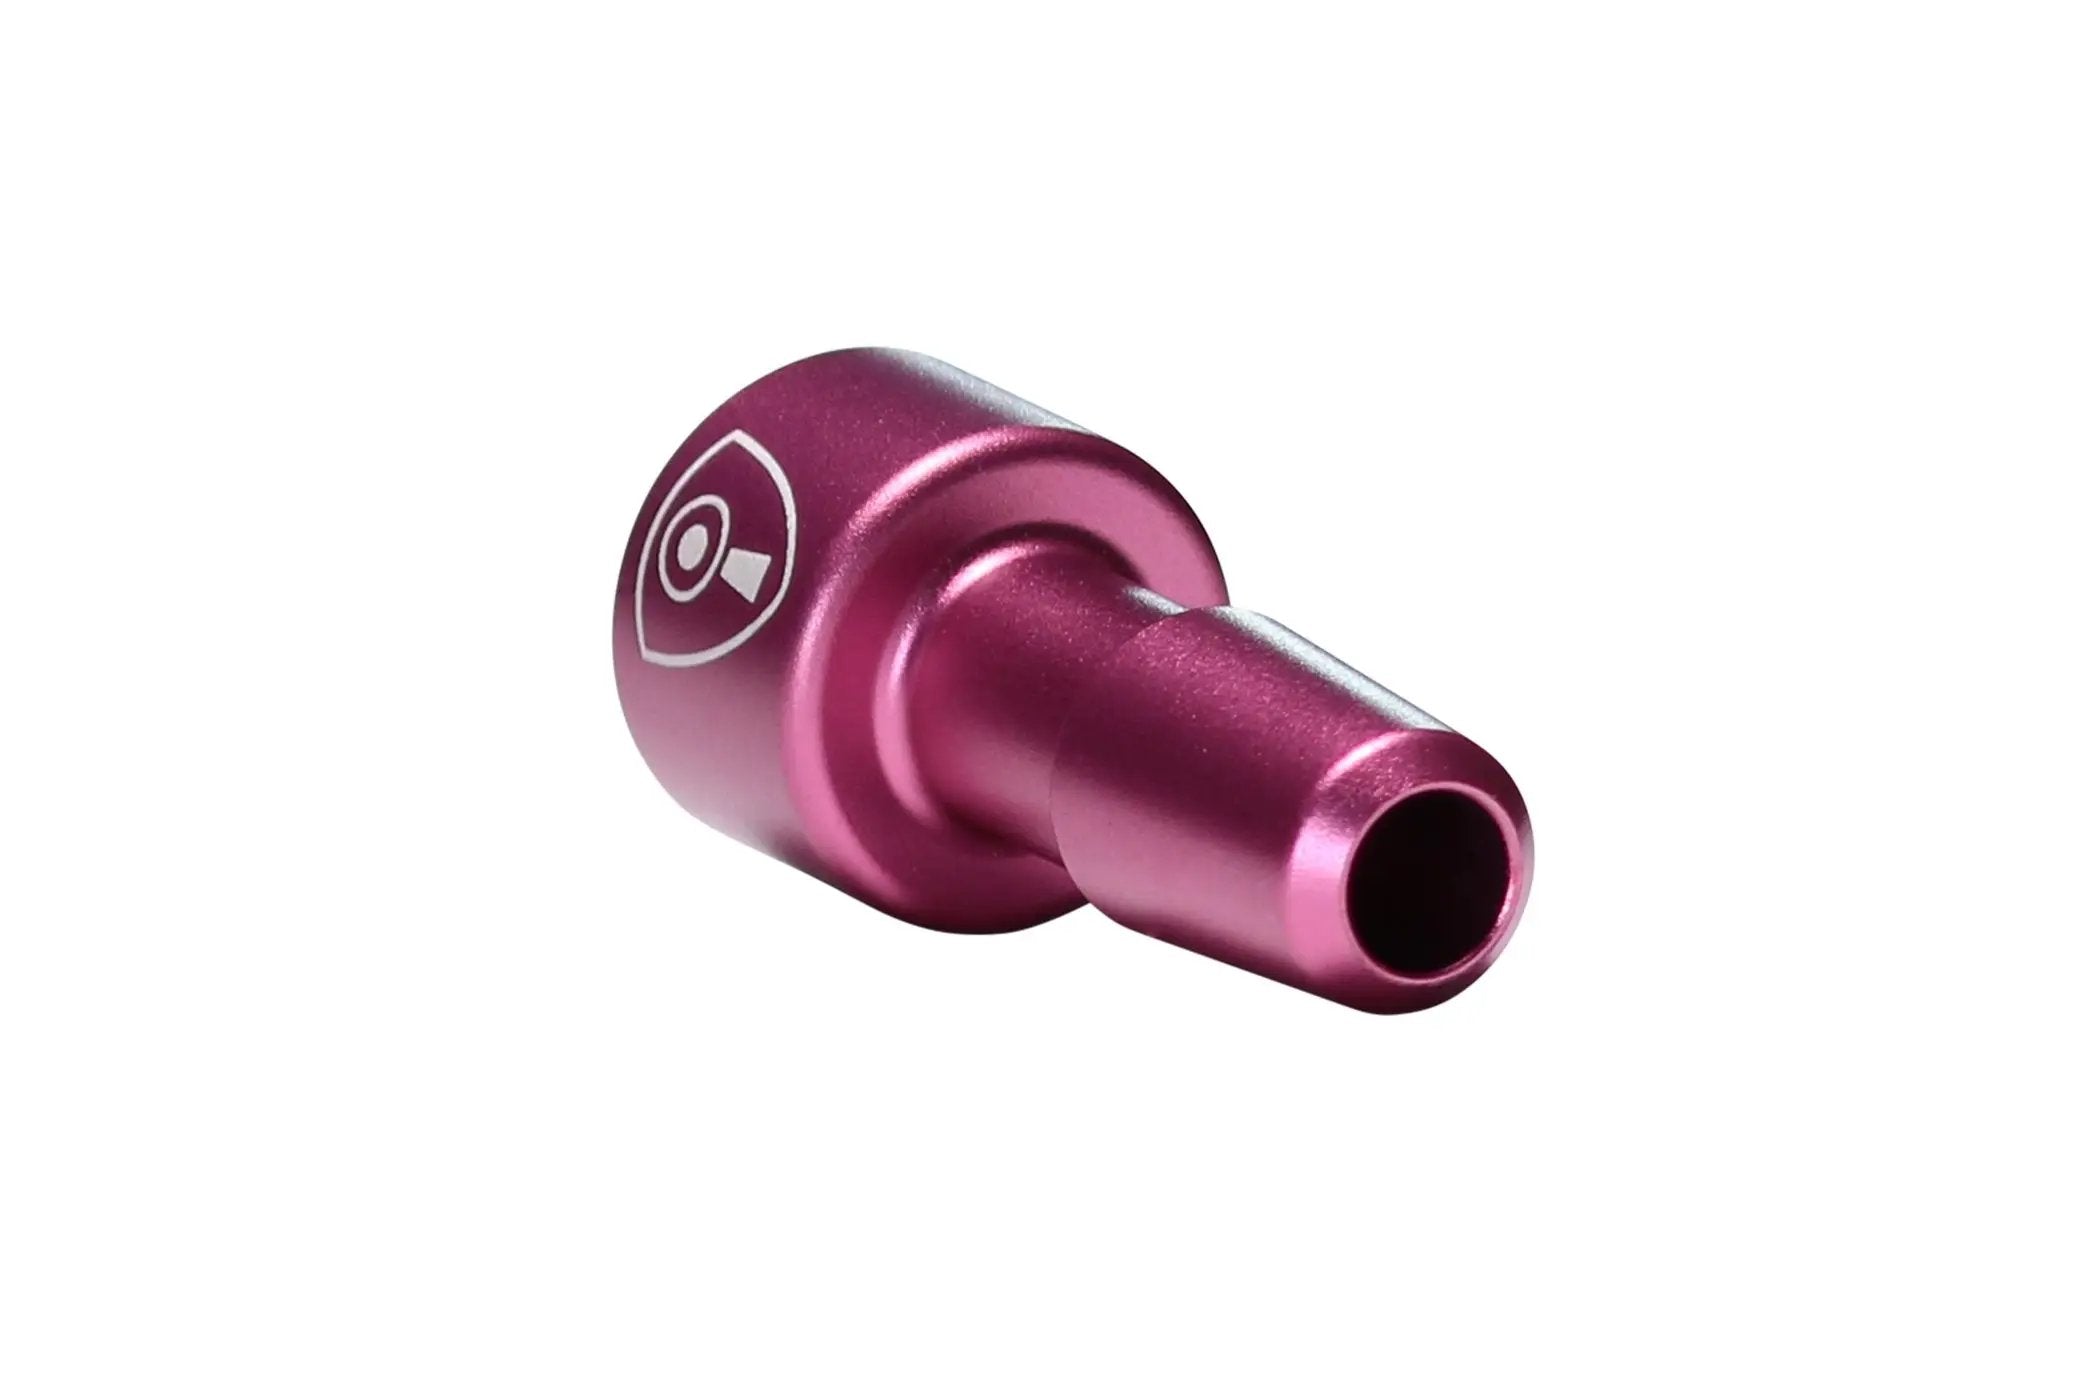 Invincibowl - GERANIUM INVINCIBOWL INFINITY- PINK 14MM by Chill Steel Pipes